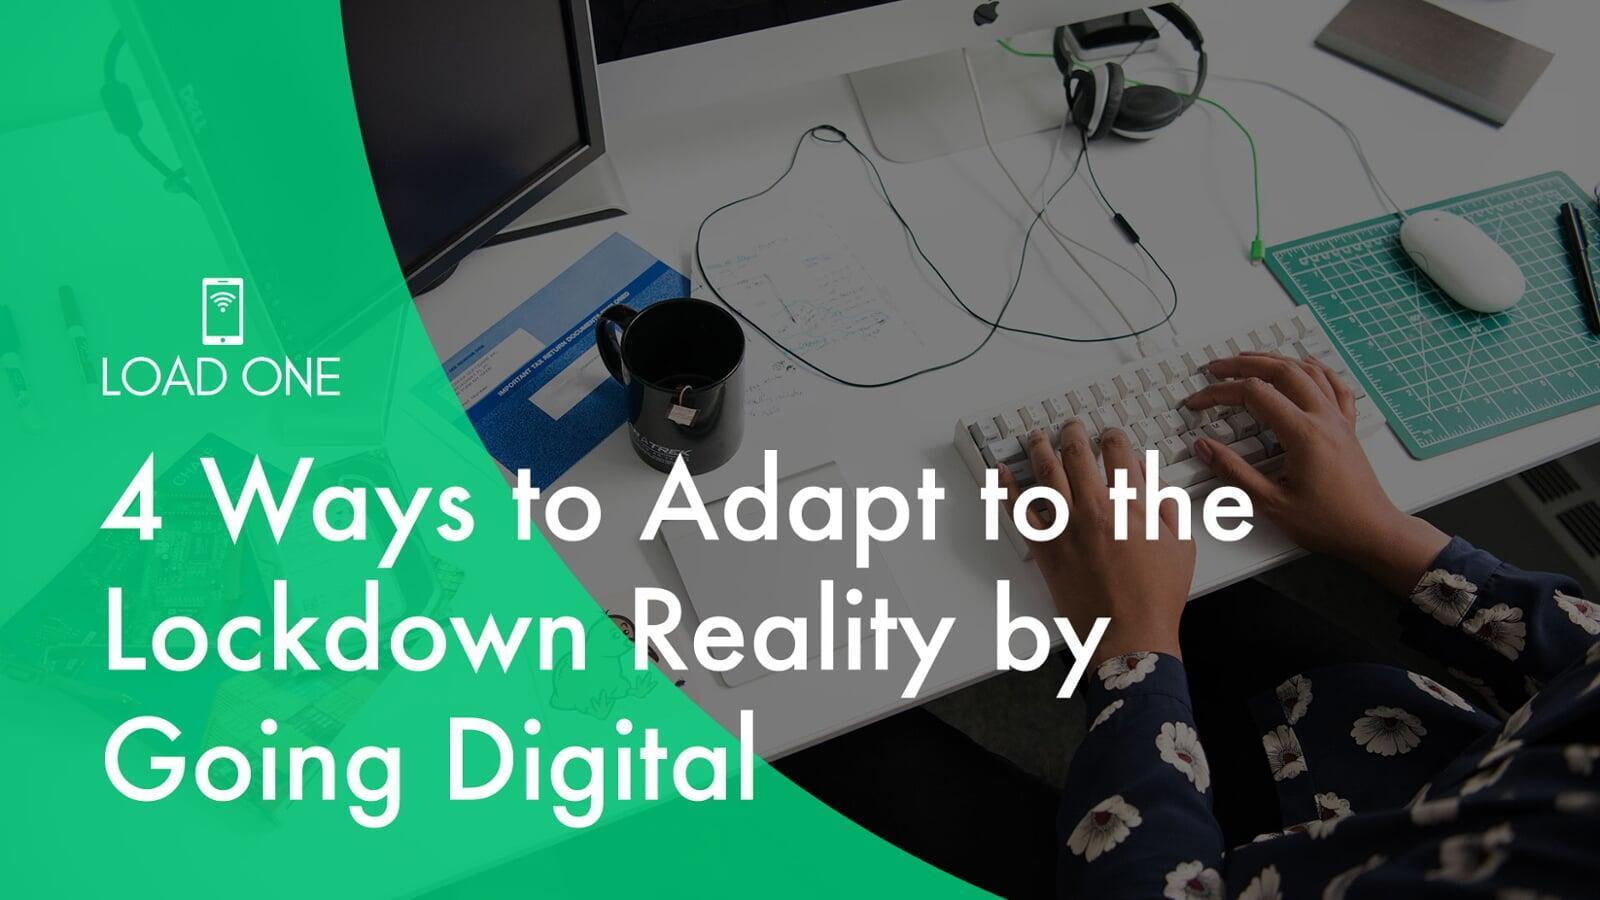 4 Ways to Adapt to the Lockdown Reality By Going Digital